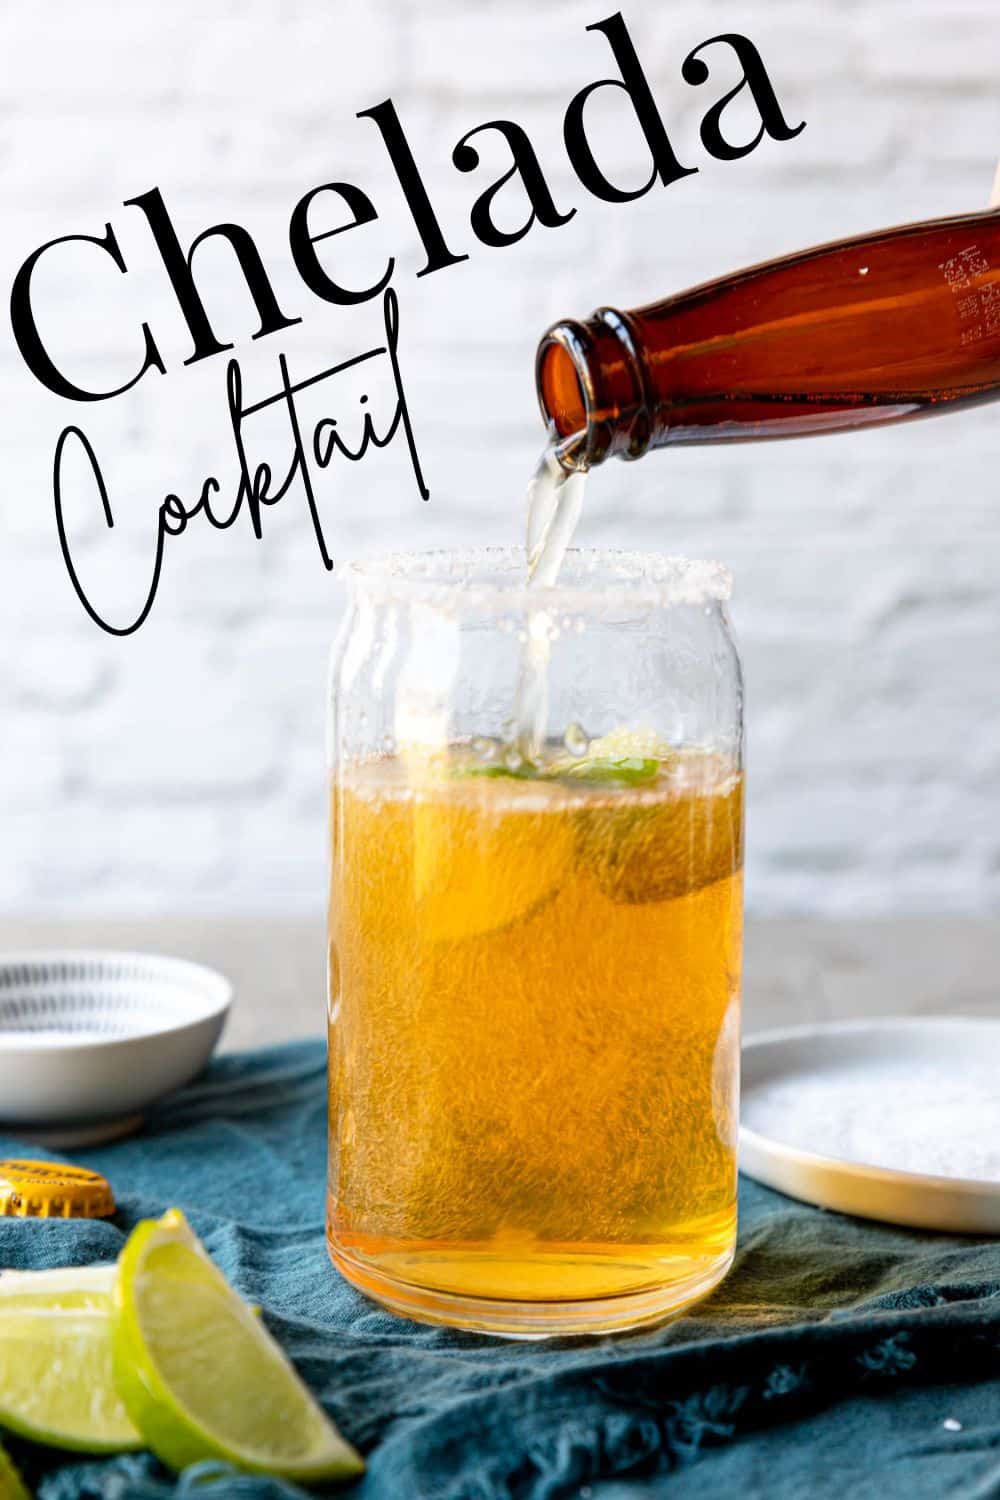 Pinterest image with text overlay for Chelada